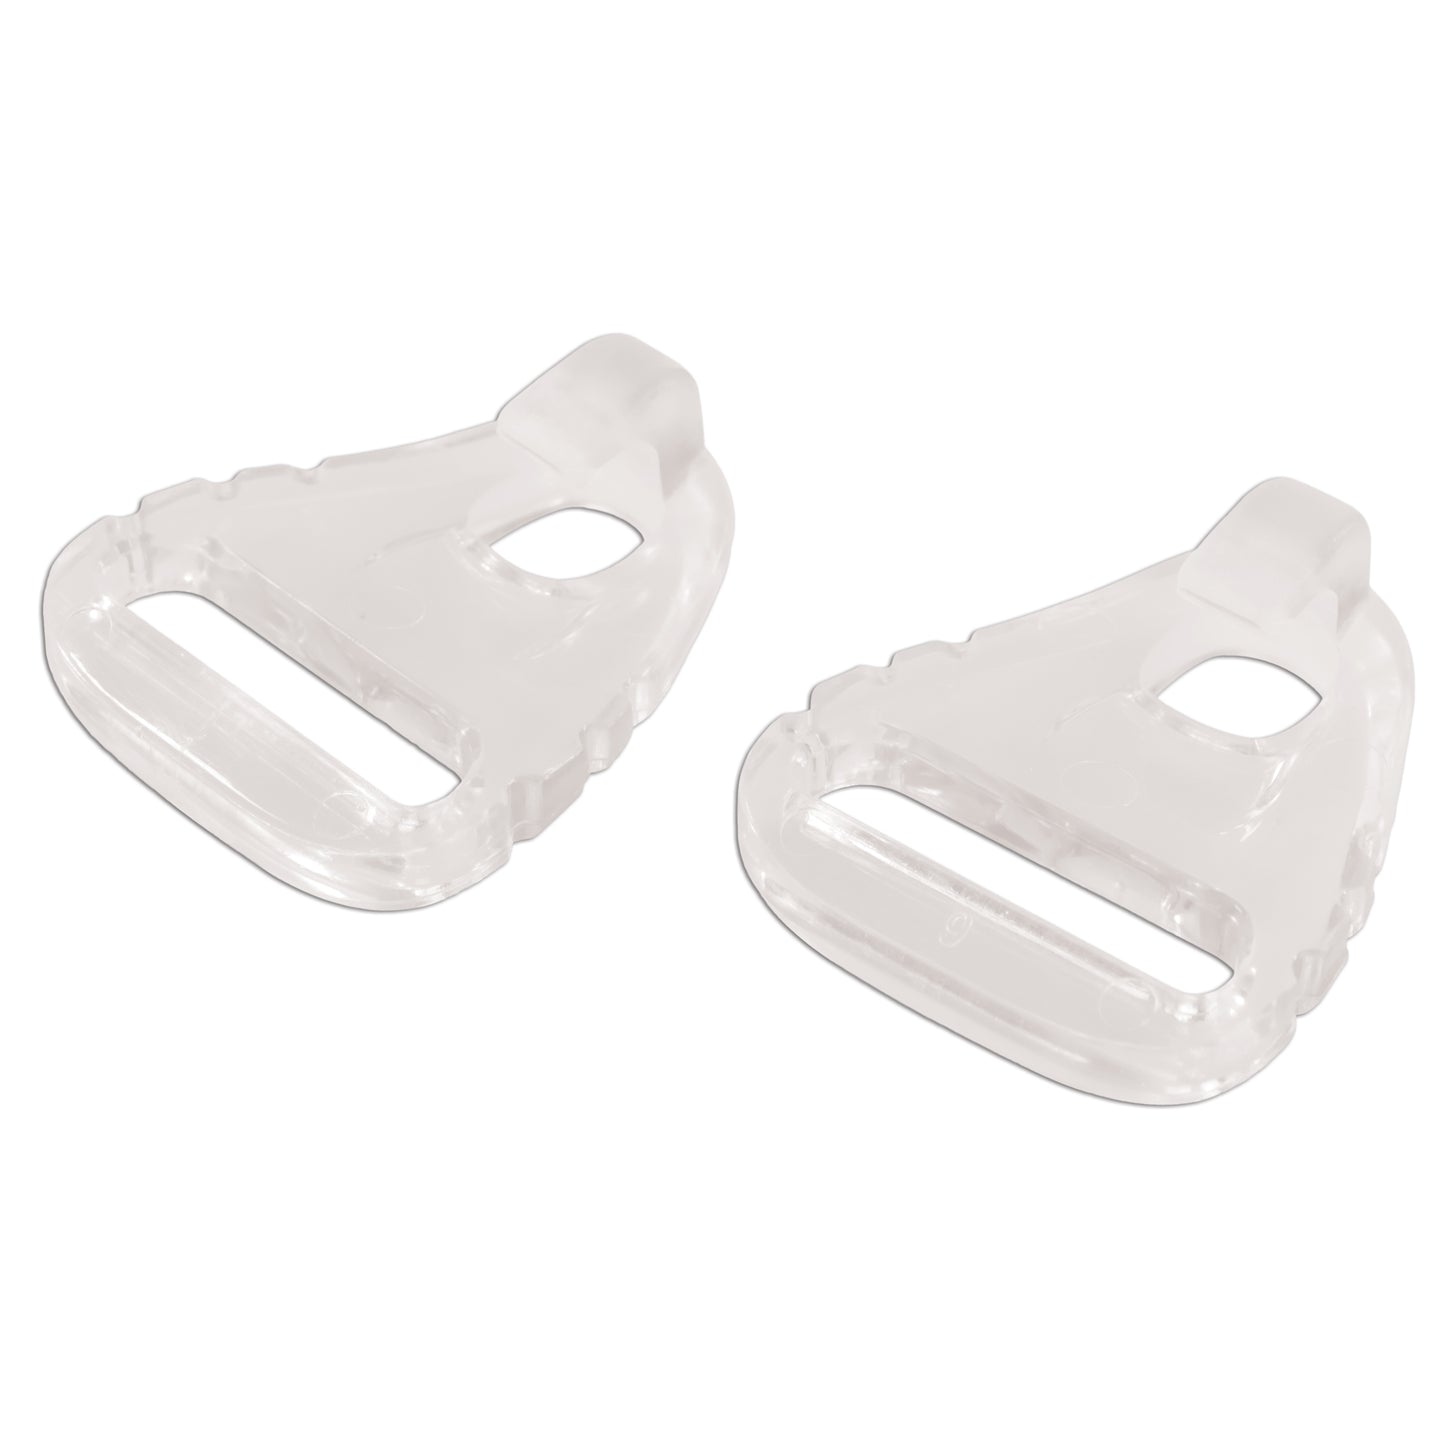 DreamEasy 2 Full Face Replacement Headgear Clips